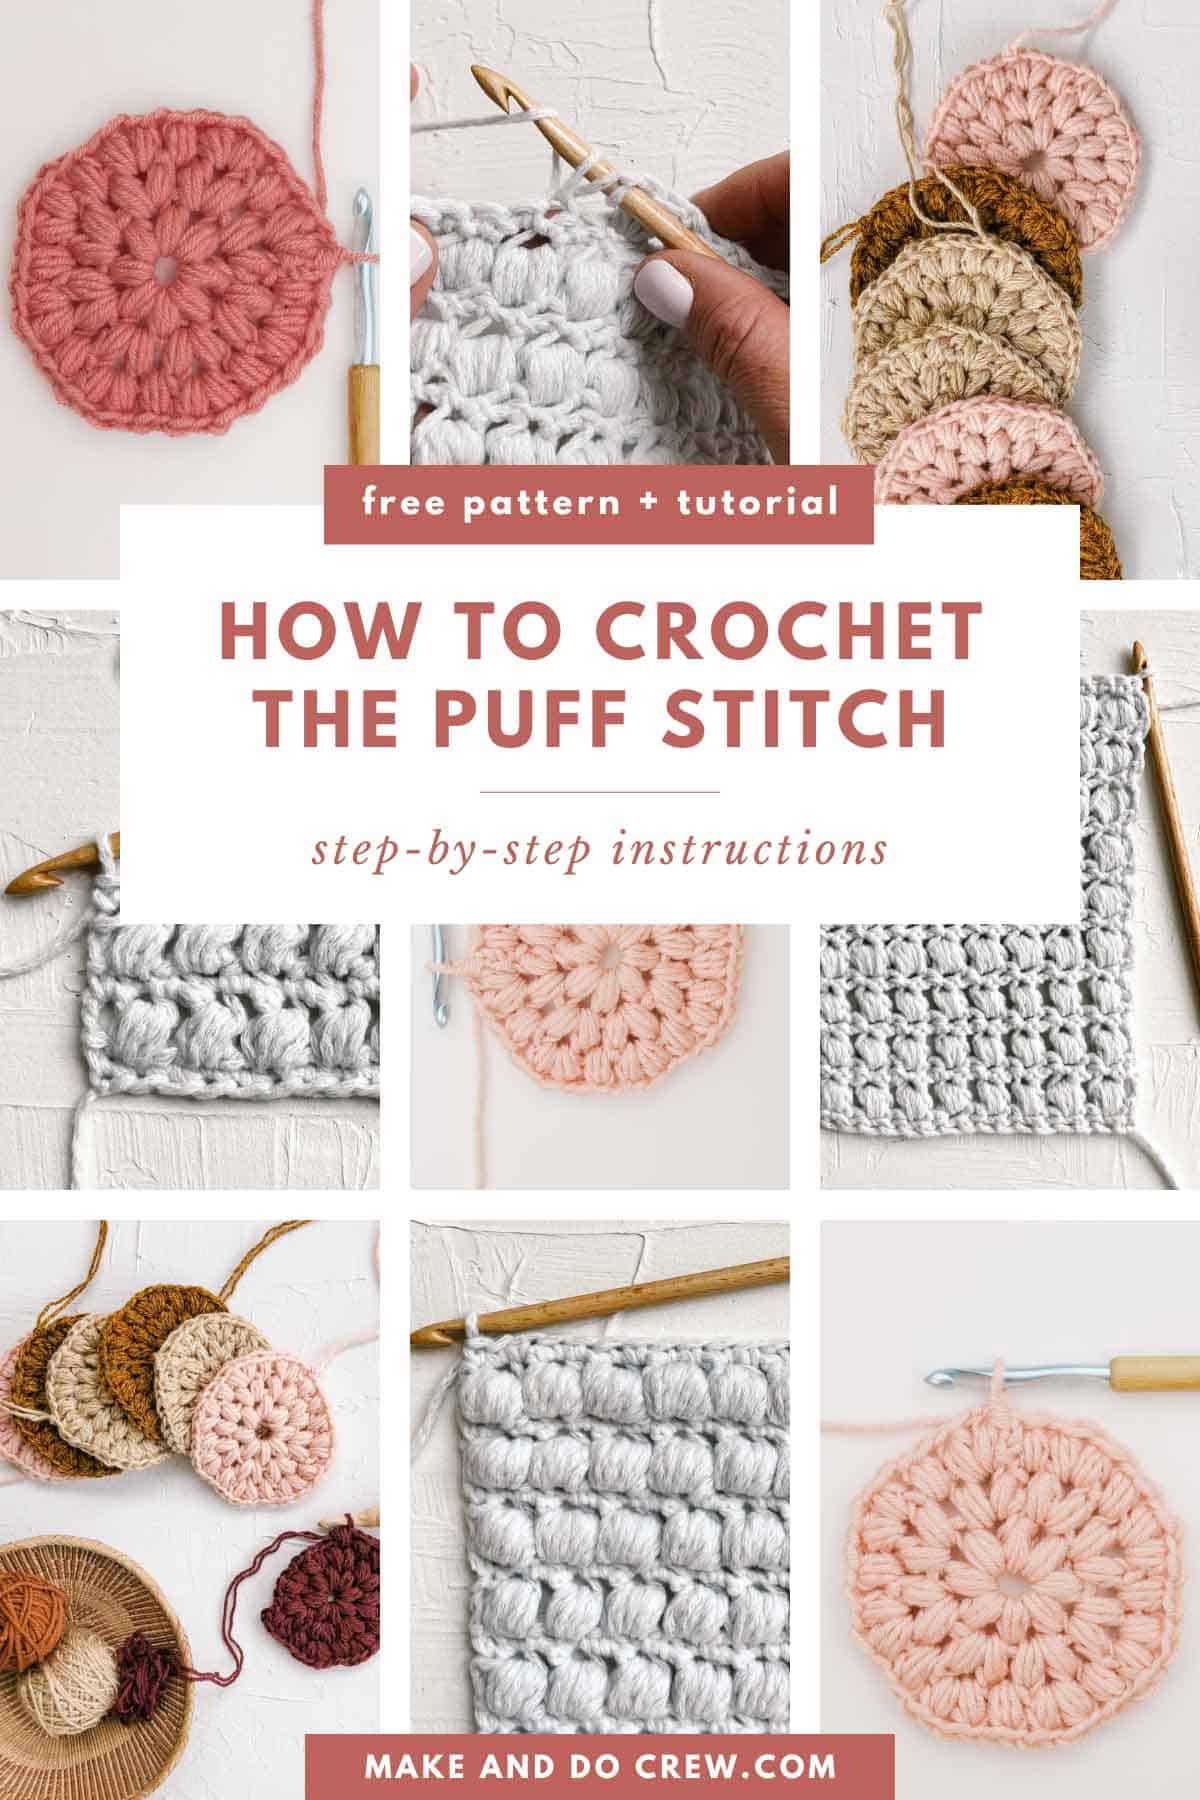 Collection of different ways to crochet the puff stitch pattern.